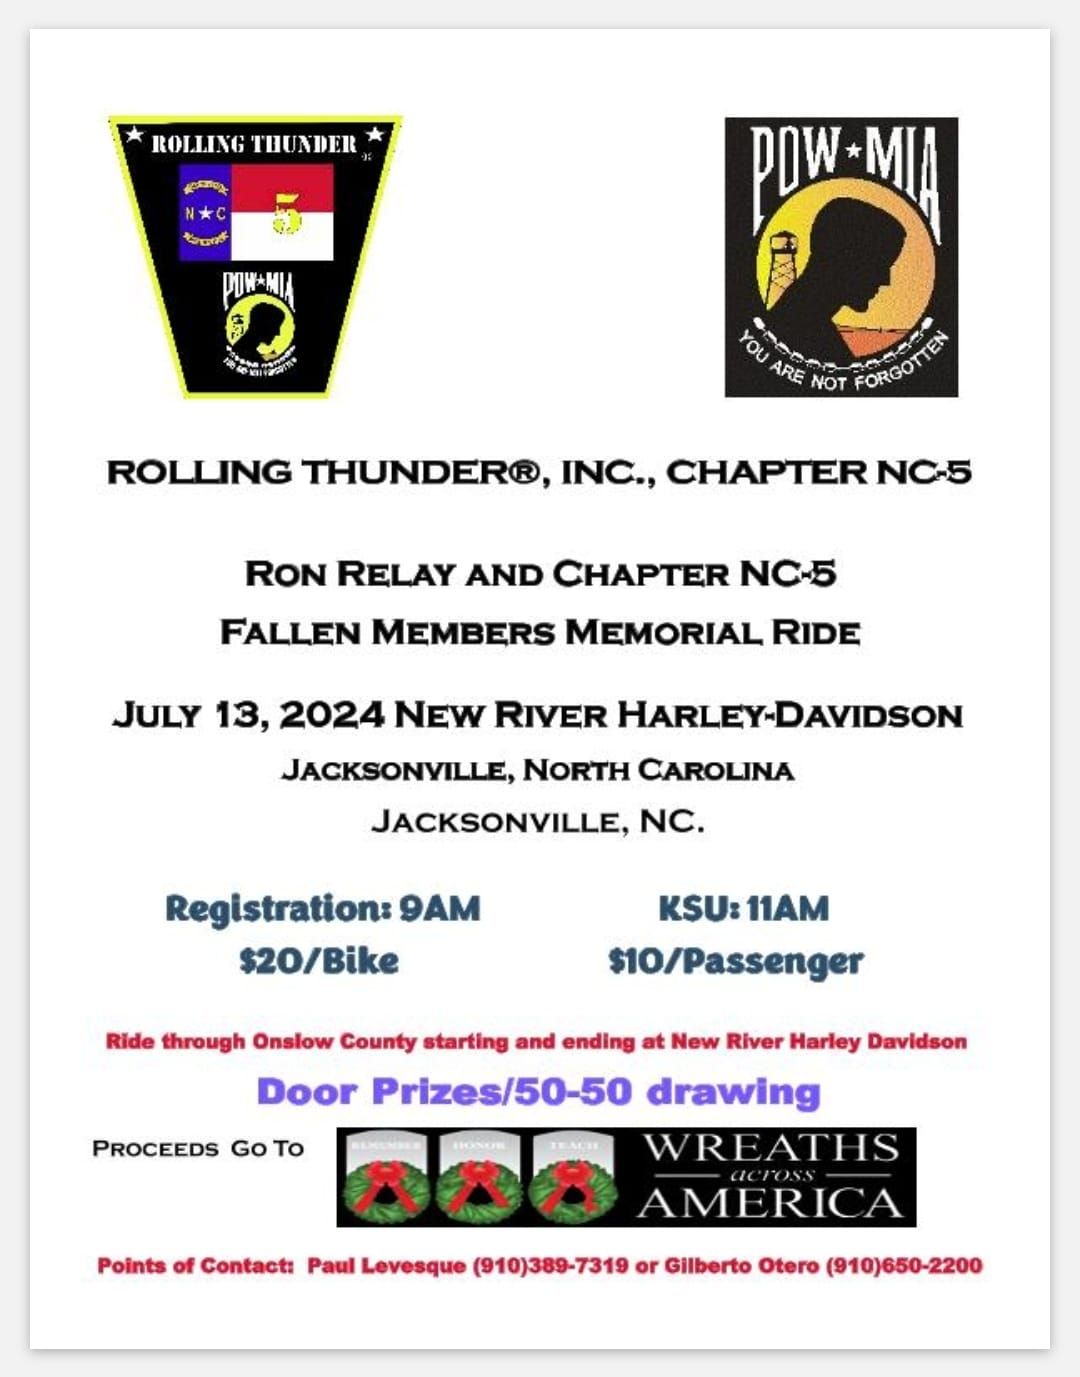 Rolling Thunder\u00ae, Inc. Chapter NC-5 Ron Relay and Fallen Members Memorial Ride